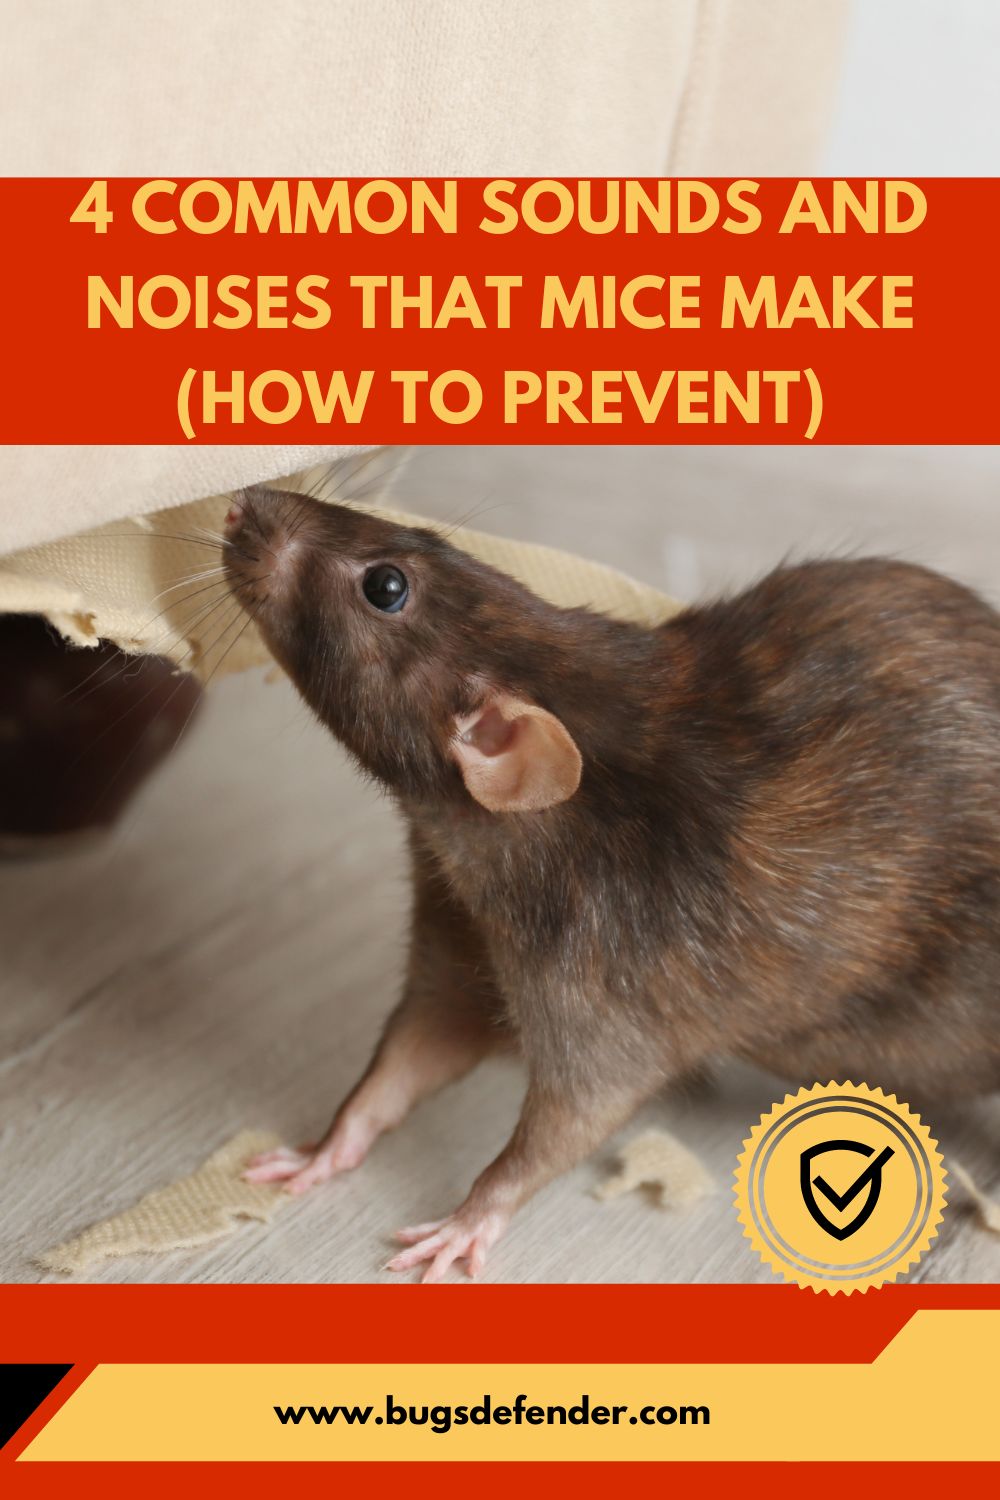 4 Common Sounds and Noises That Mice Make (How to prevent) pin 2